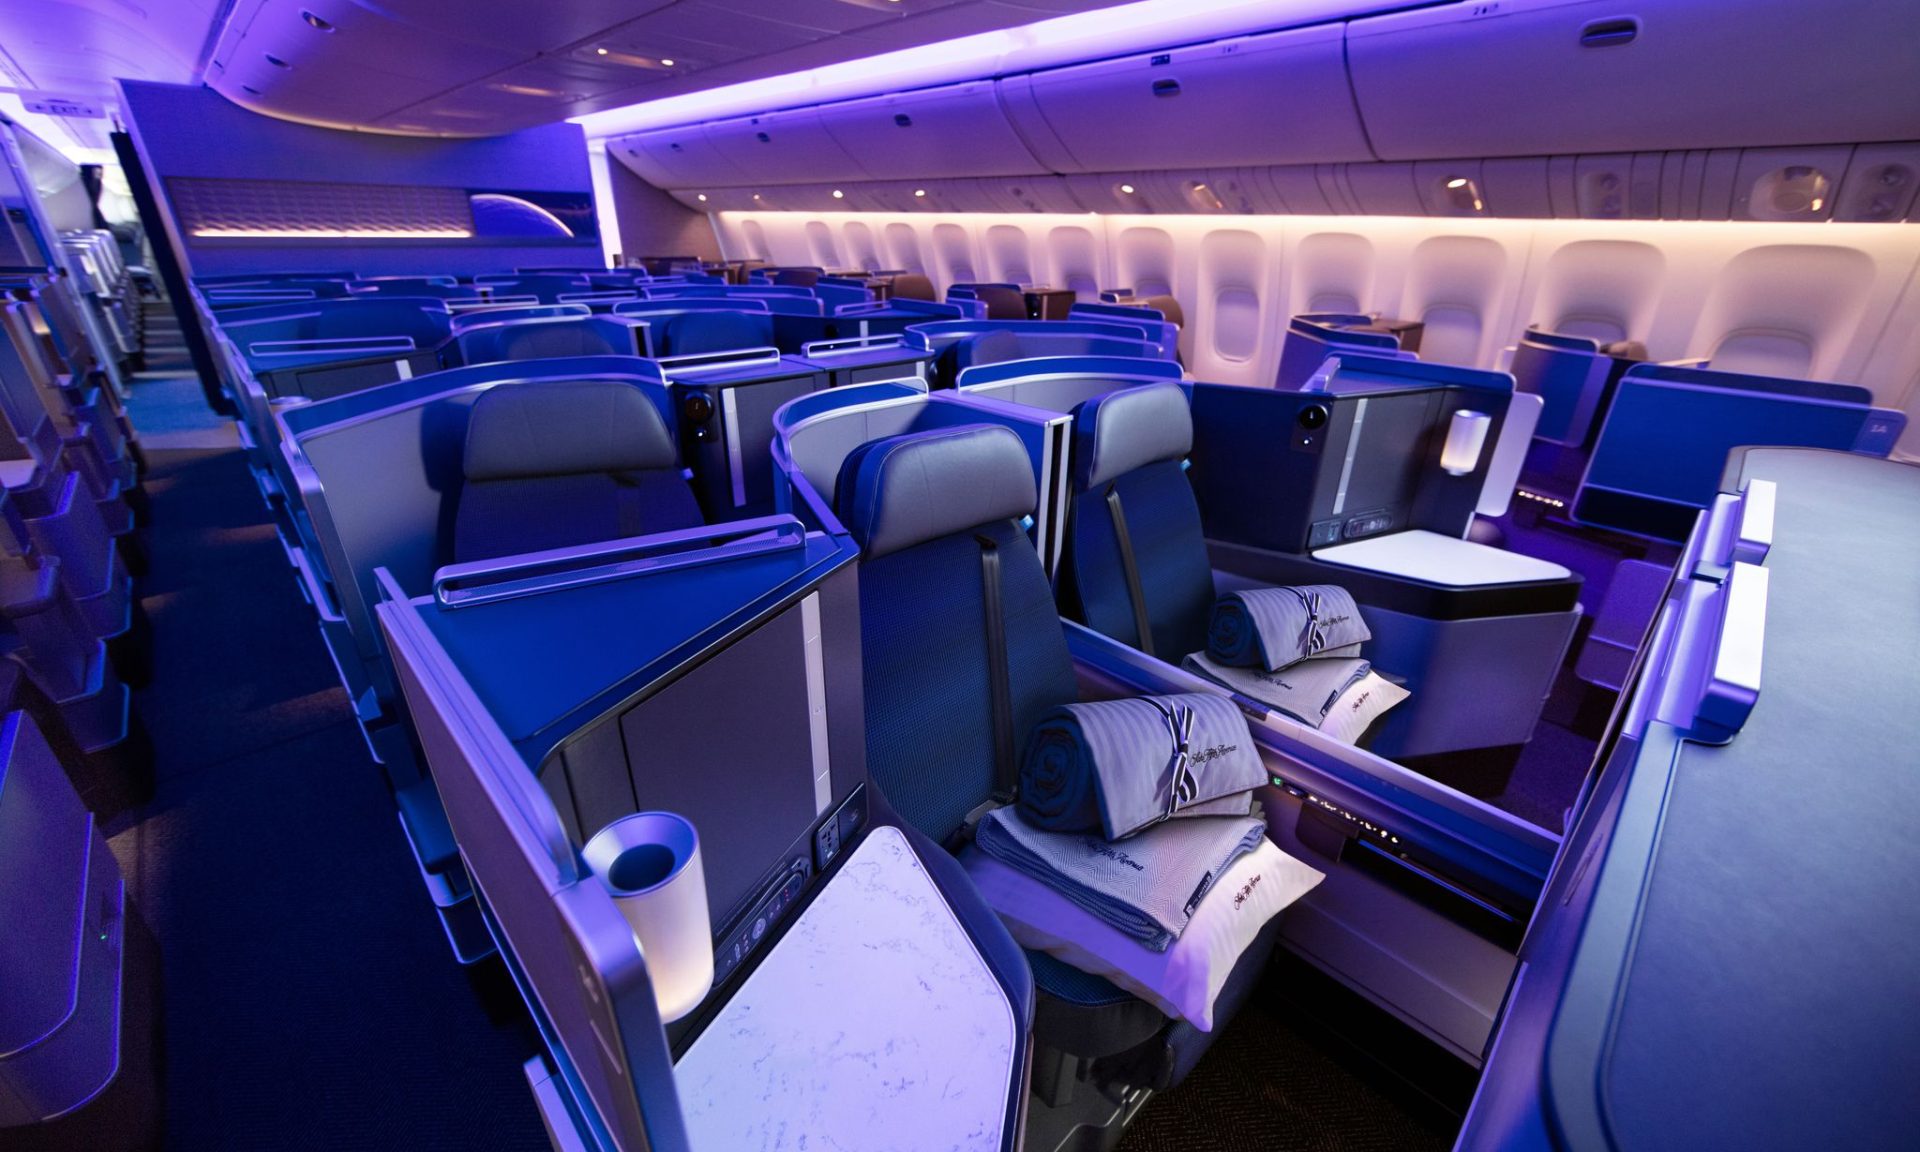 United Polaris Business Class What to Know NerdWallet